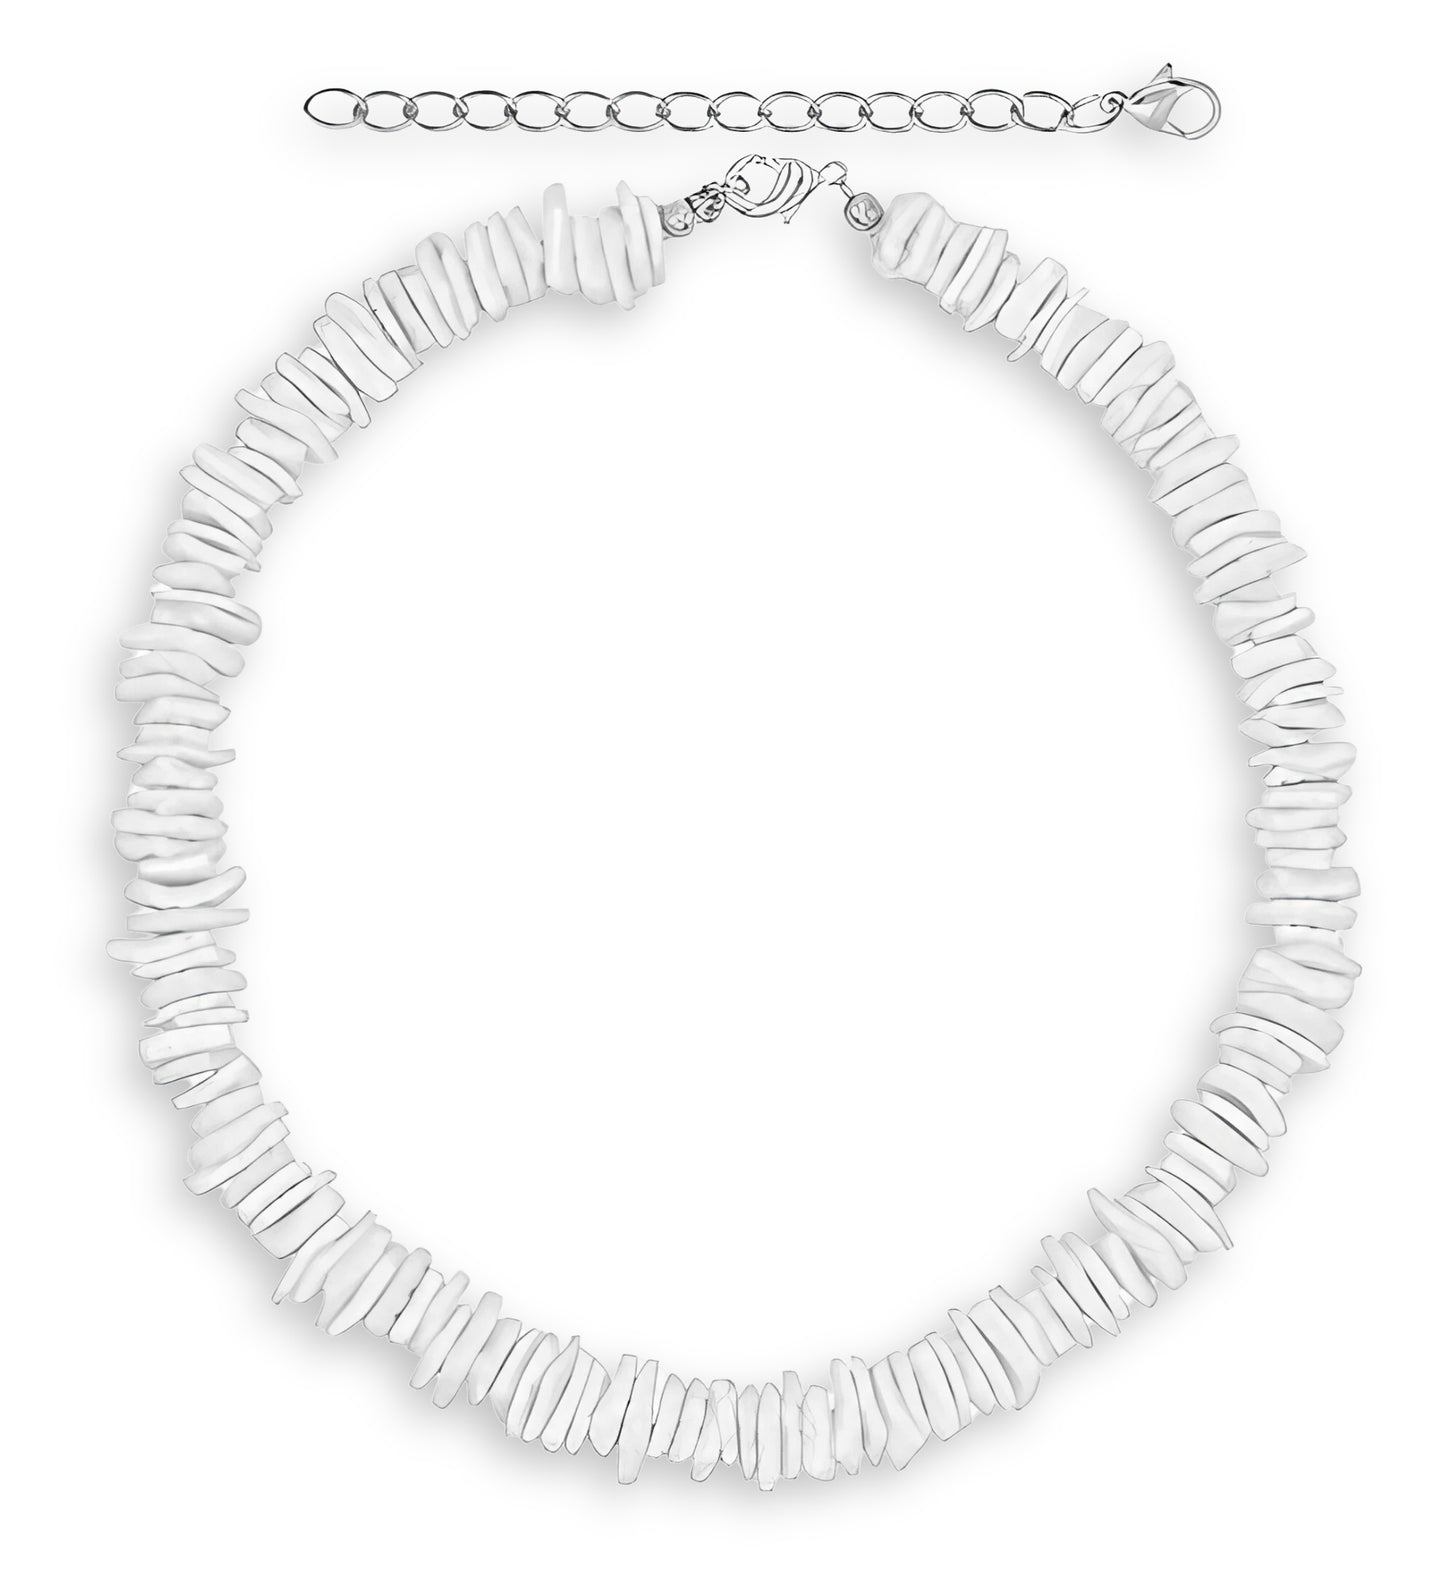 Real White Hand-Made Puka Shell Necklace